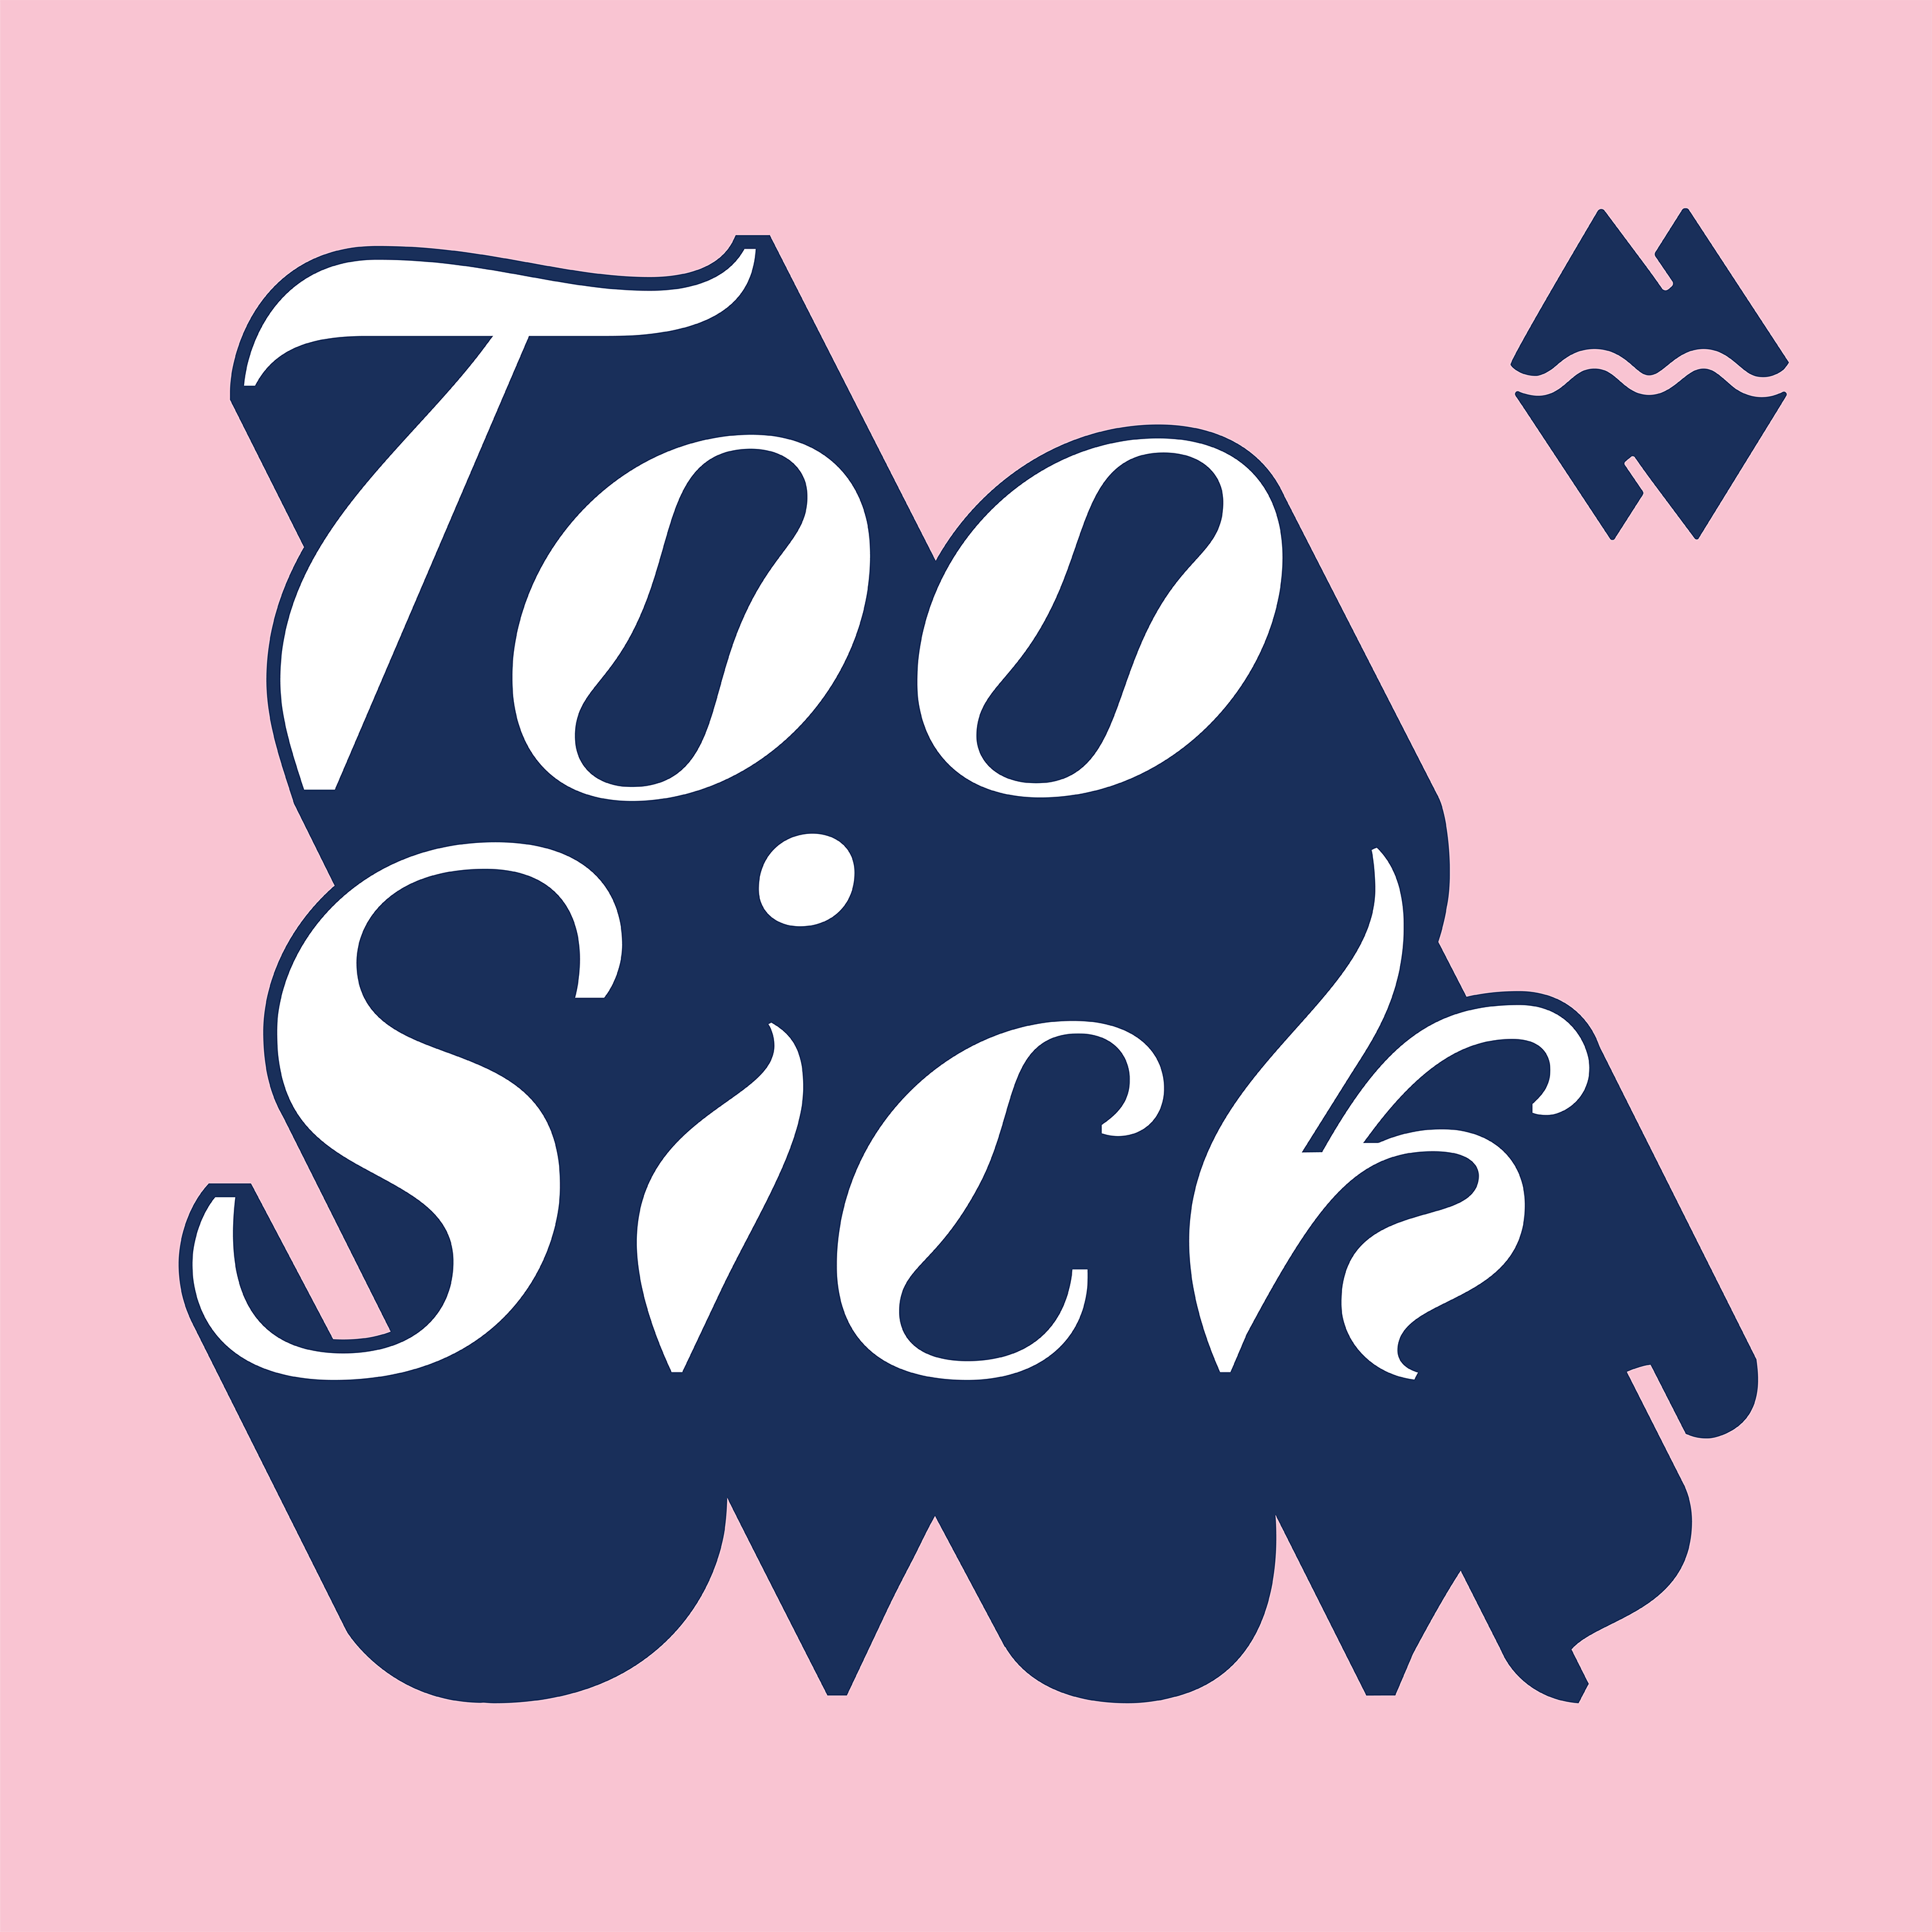 Coming Soon: Too Sick from Meow Wolf